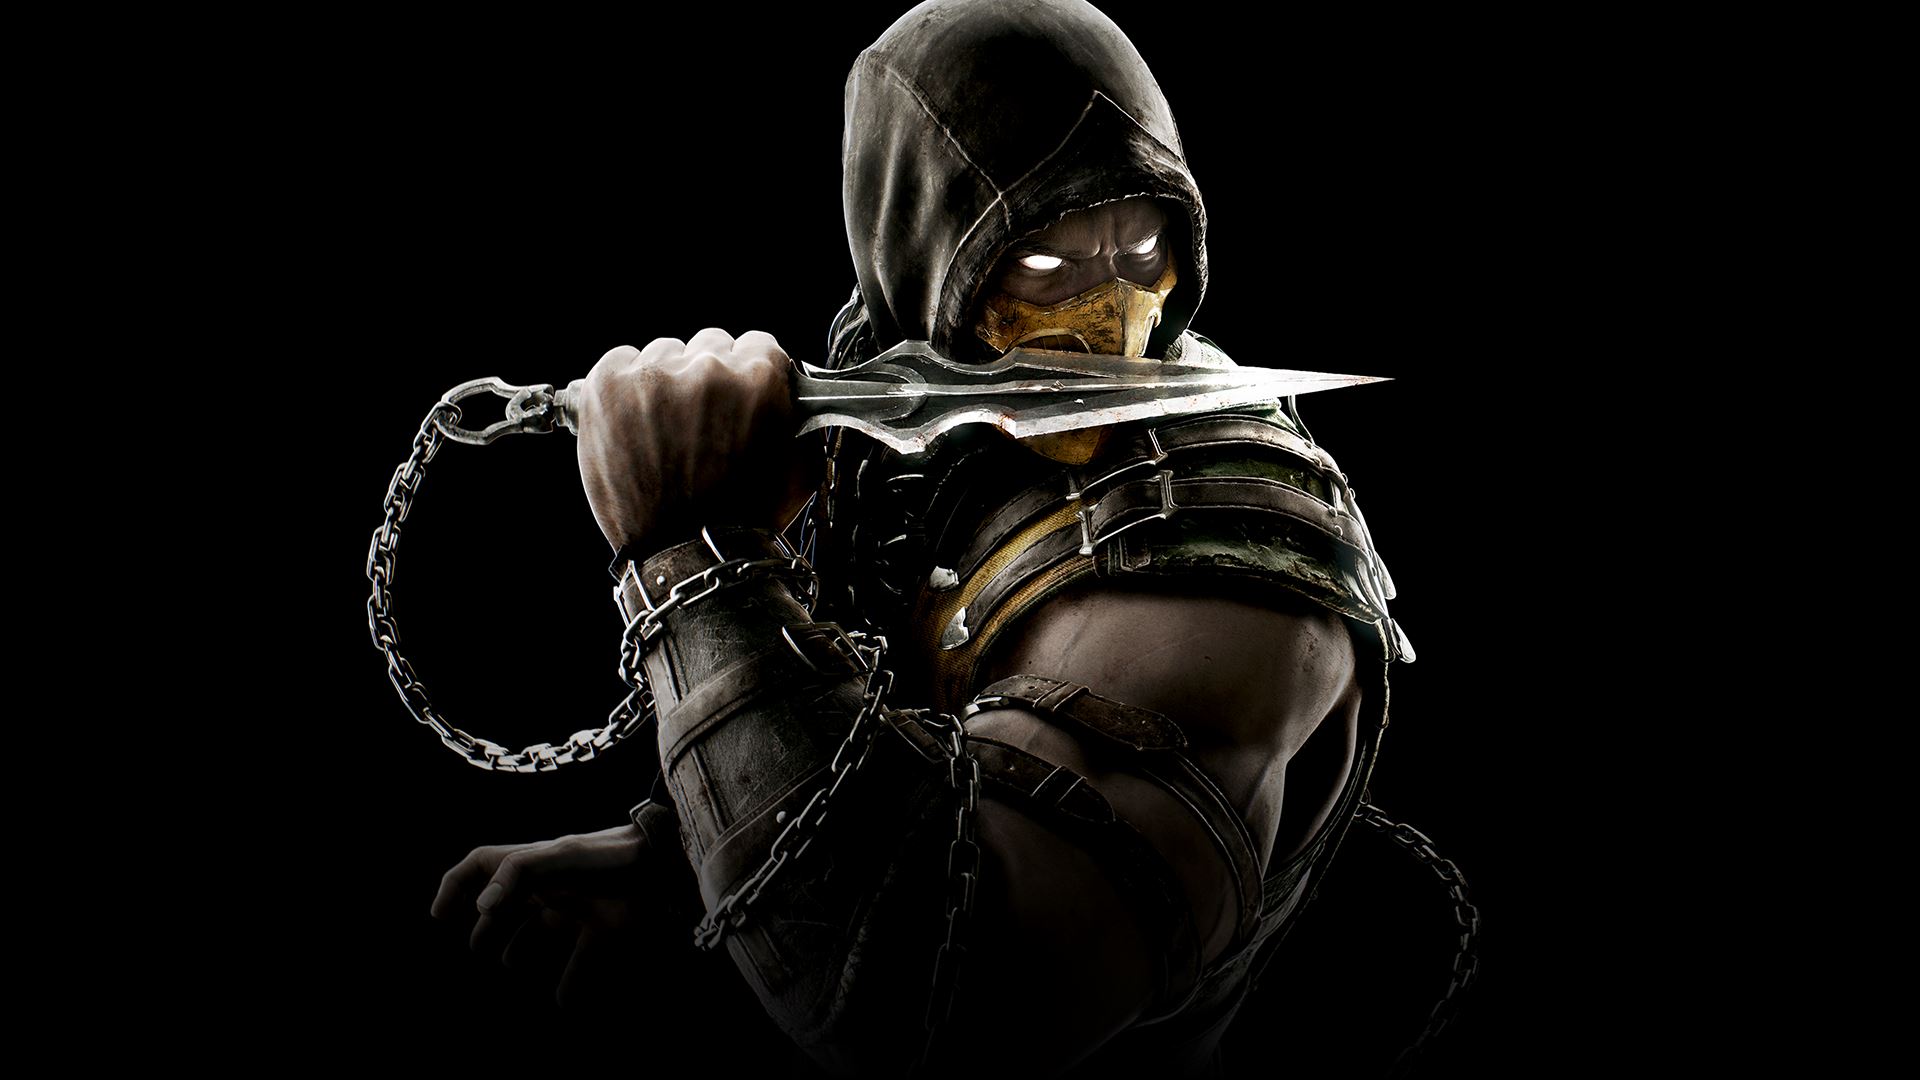 Mortal Kombat X Wallpapers, Pictures, Images